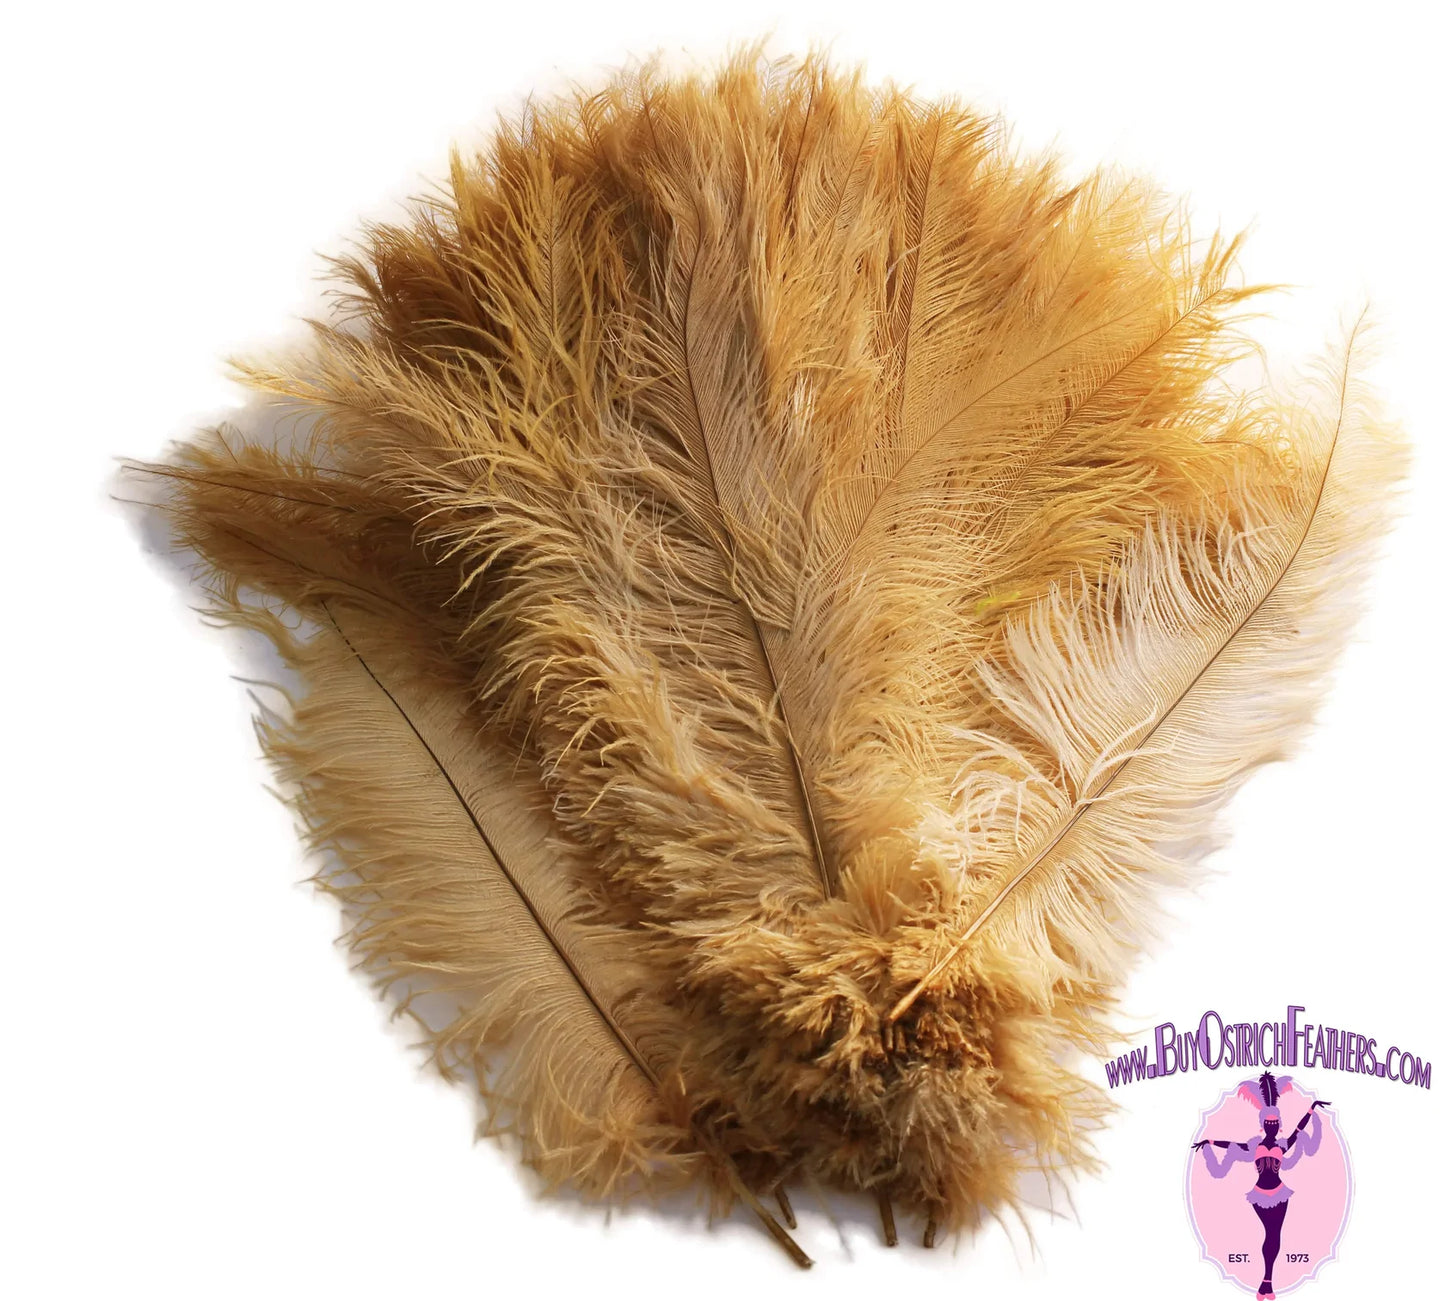 Ostrich Feather Rental 16-20" (Gold) - 250pcs - Buy Ostrich Feathers